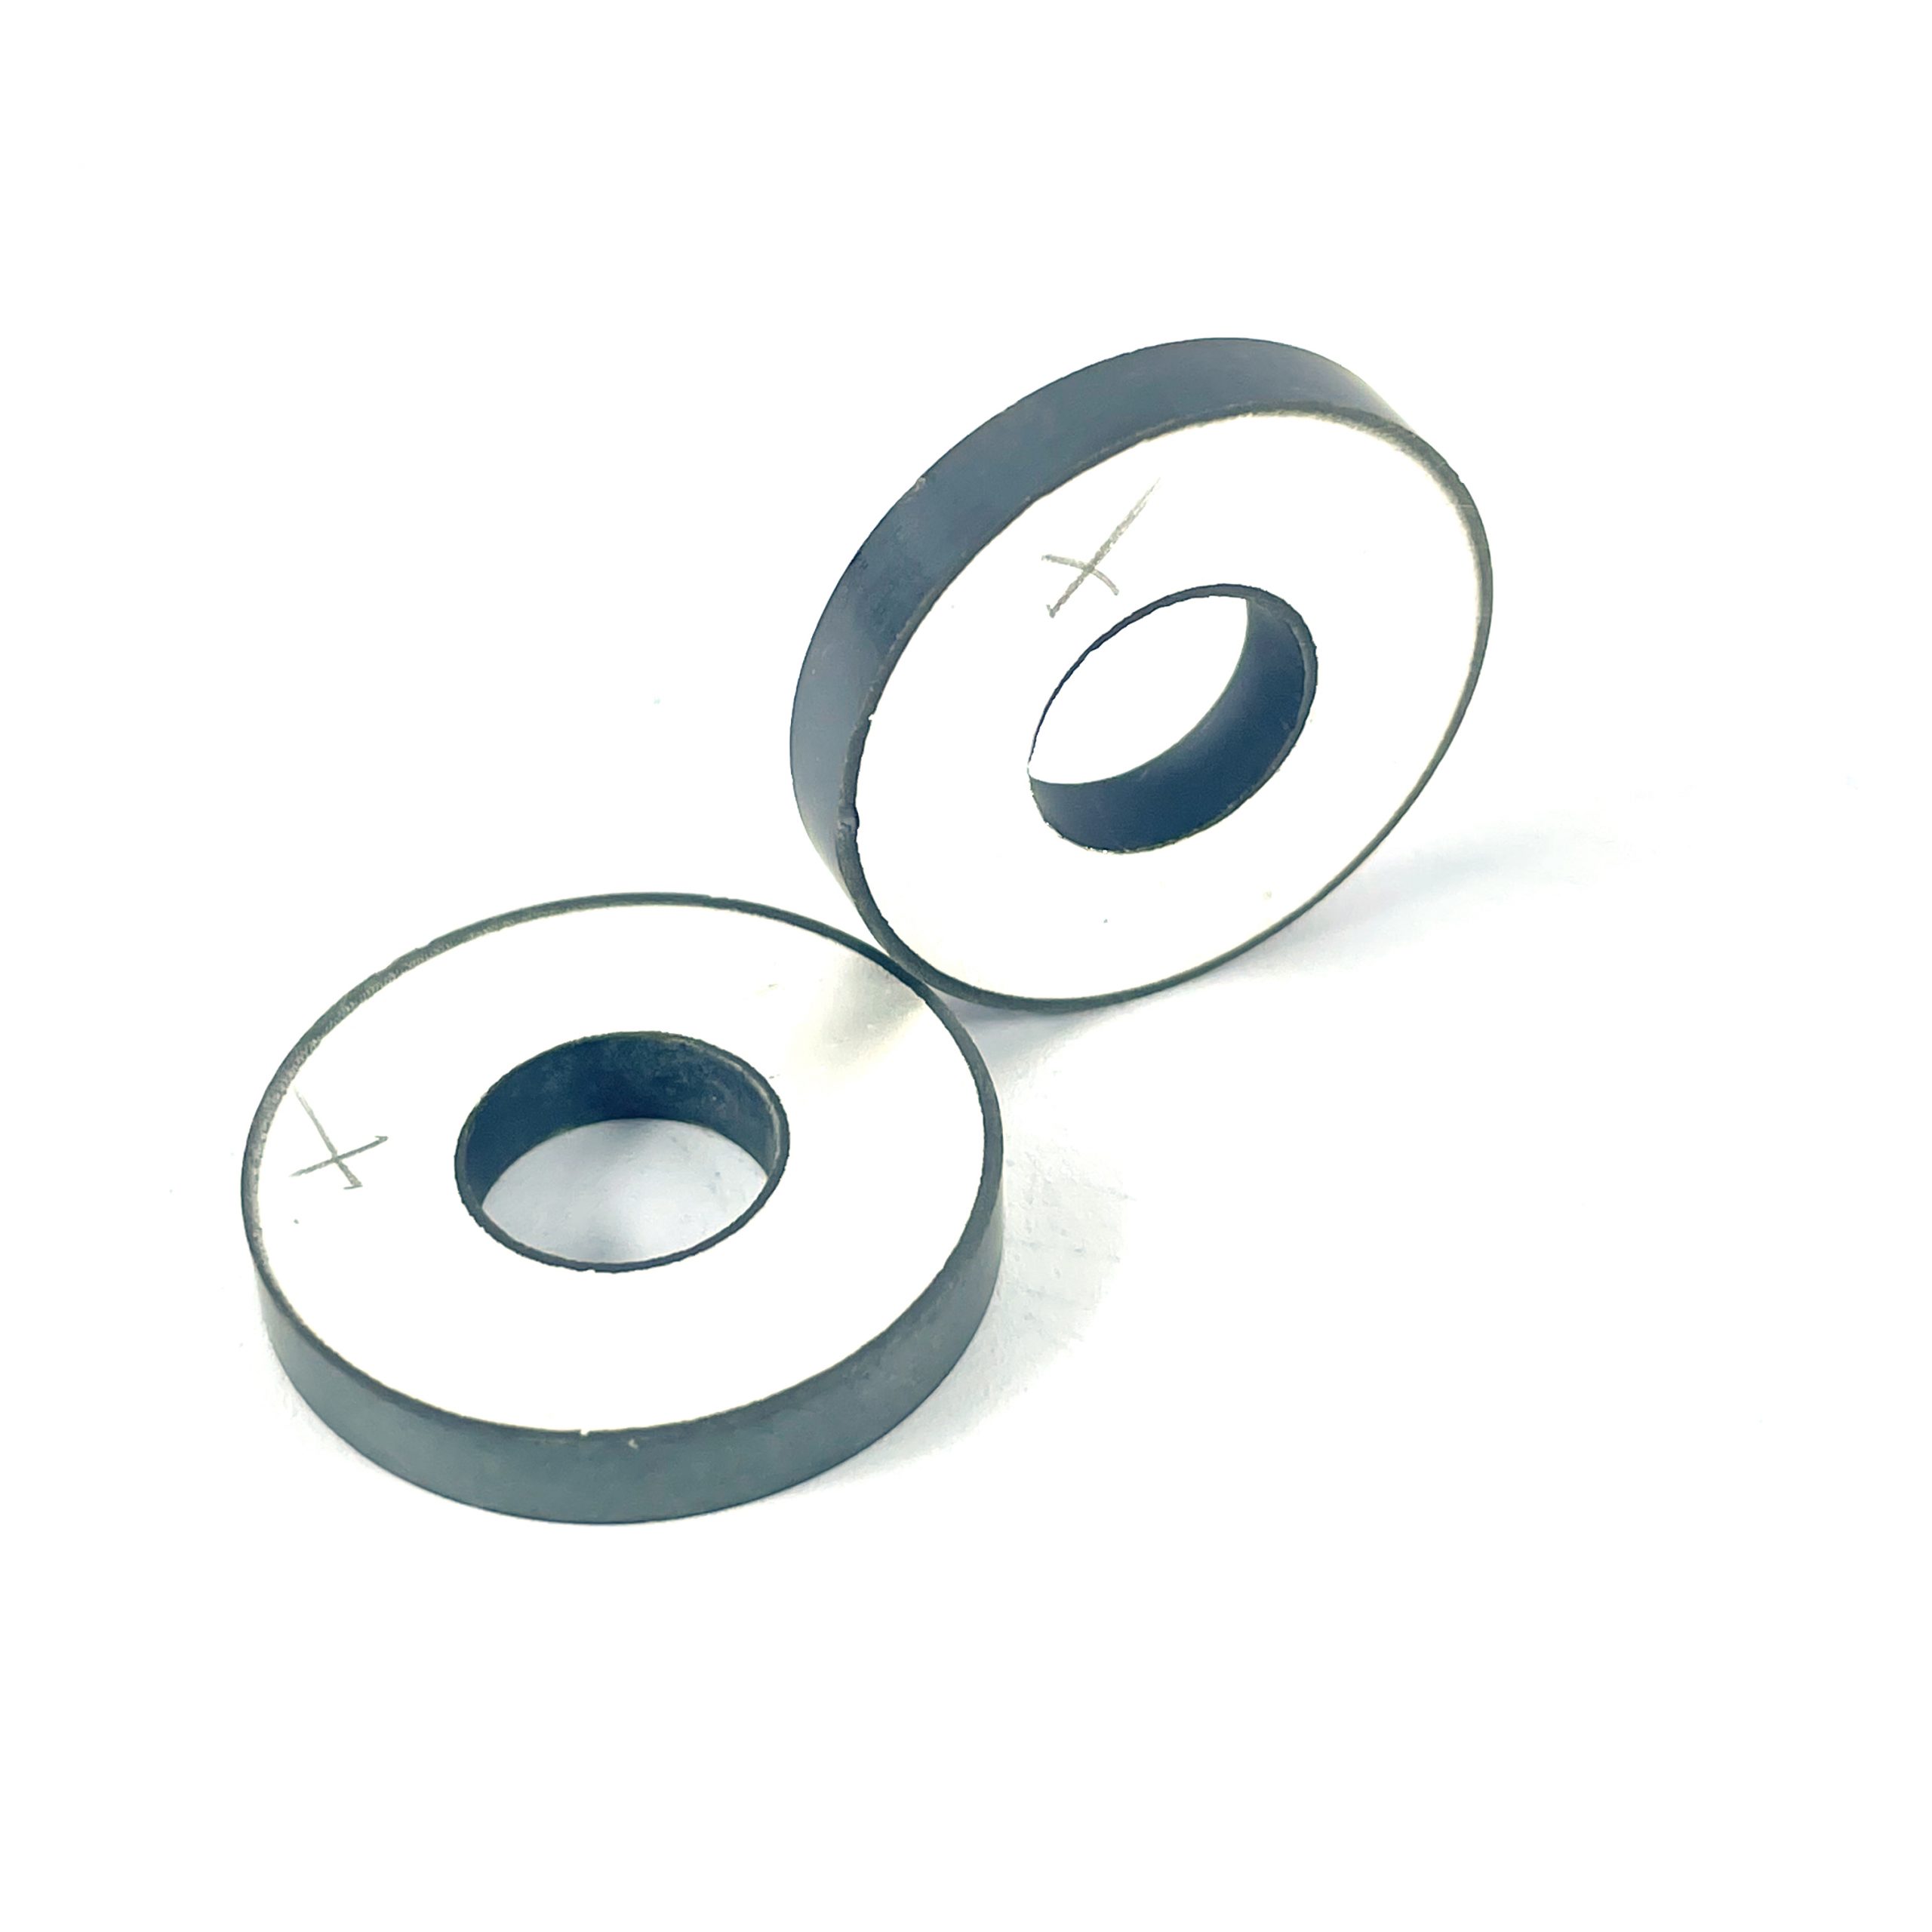 2023072813230043 scaled - Custom Ultrasonic Transducer Piezo Ceramic Ring Pzt 5A Humidifier Disc Plate Piezoelectric 40khz Element